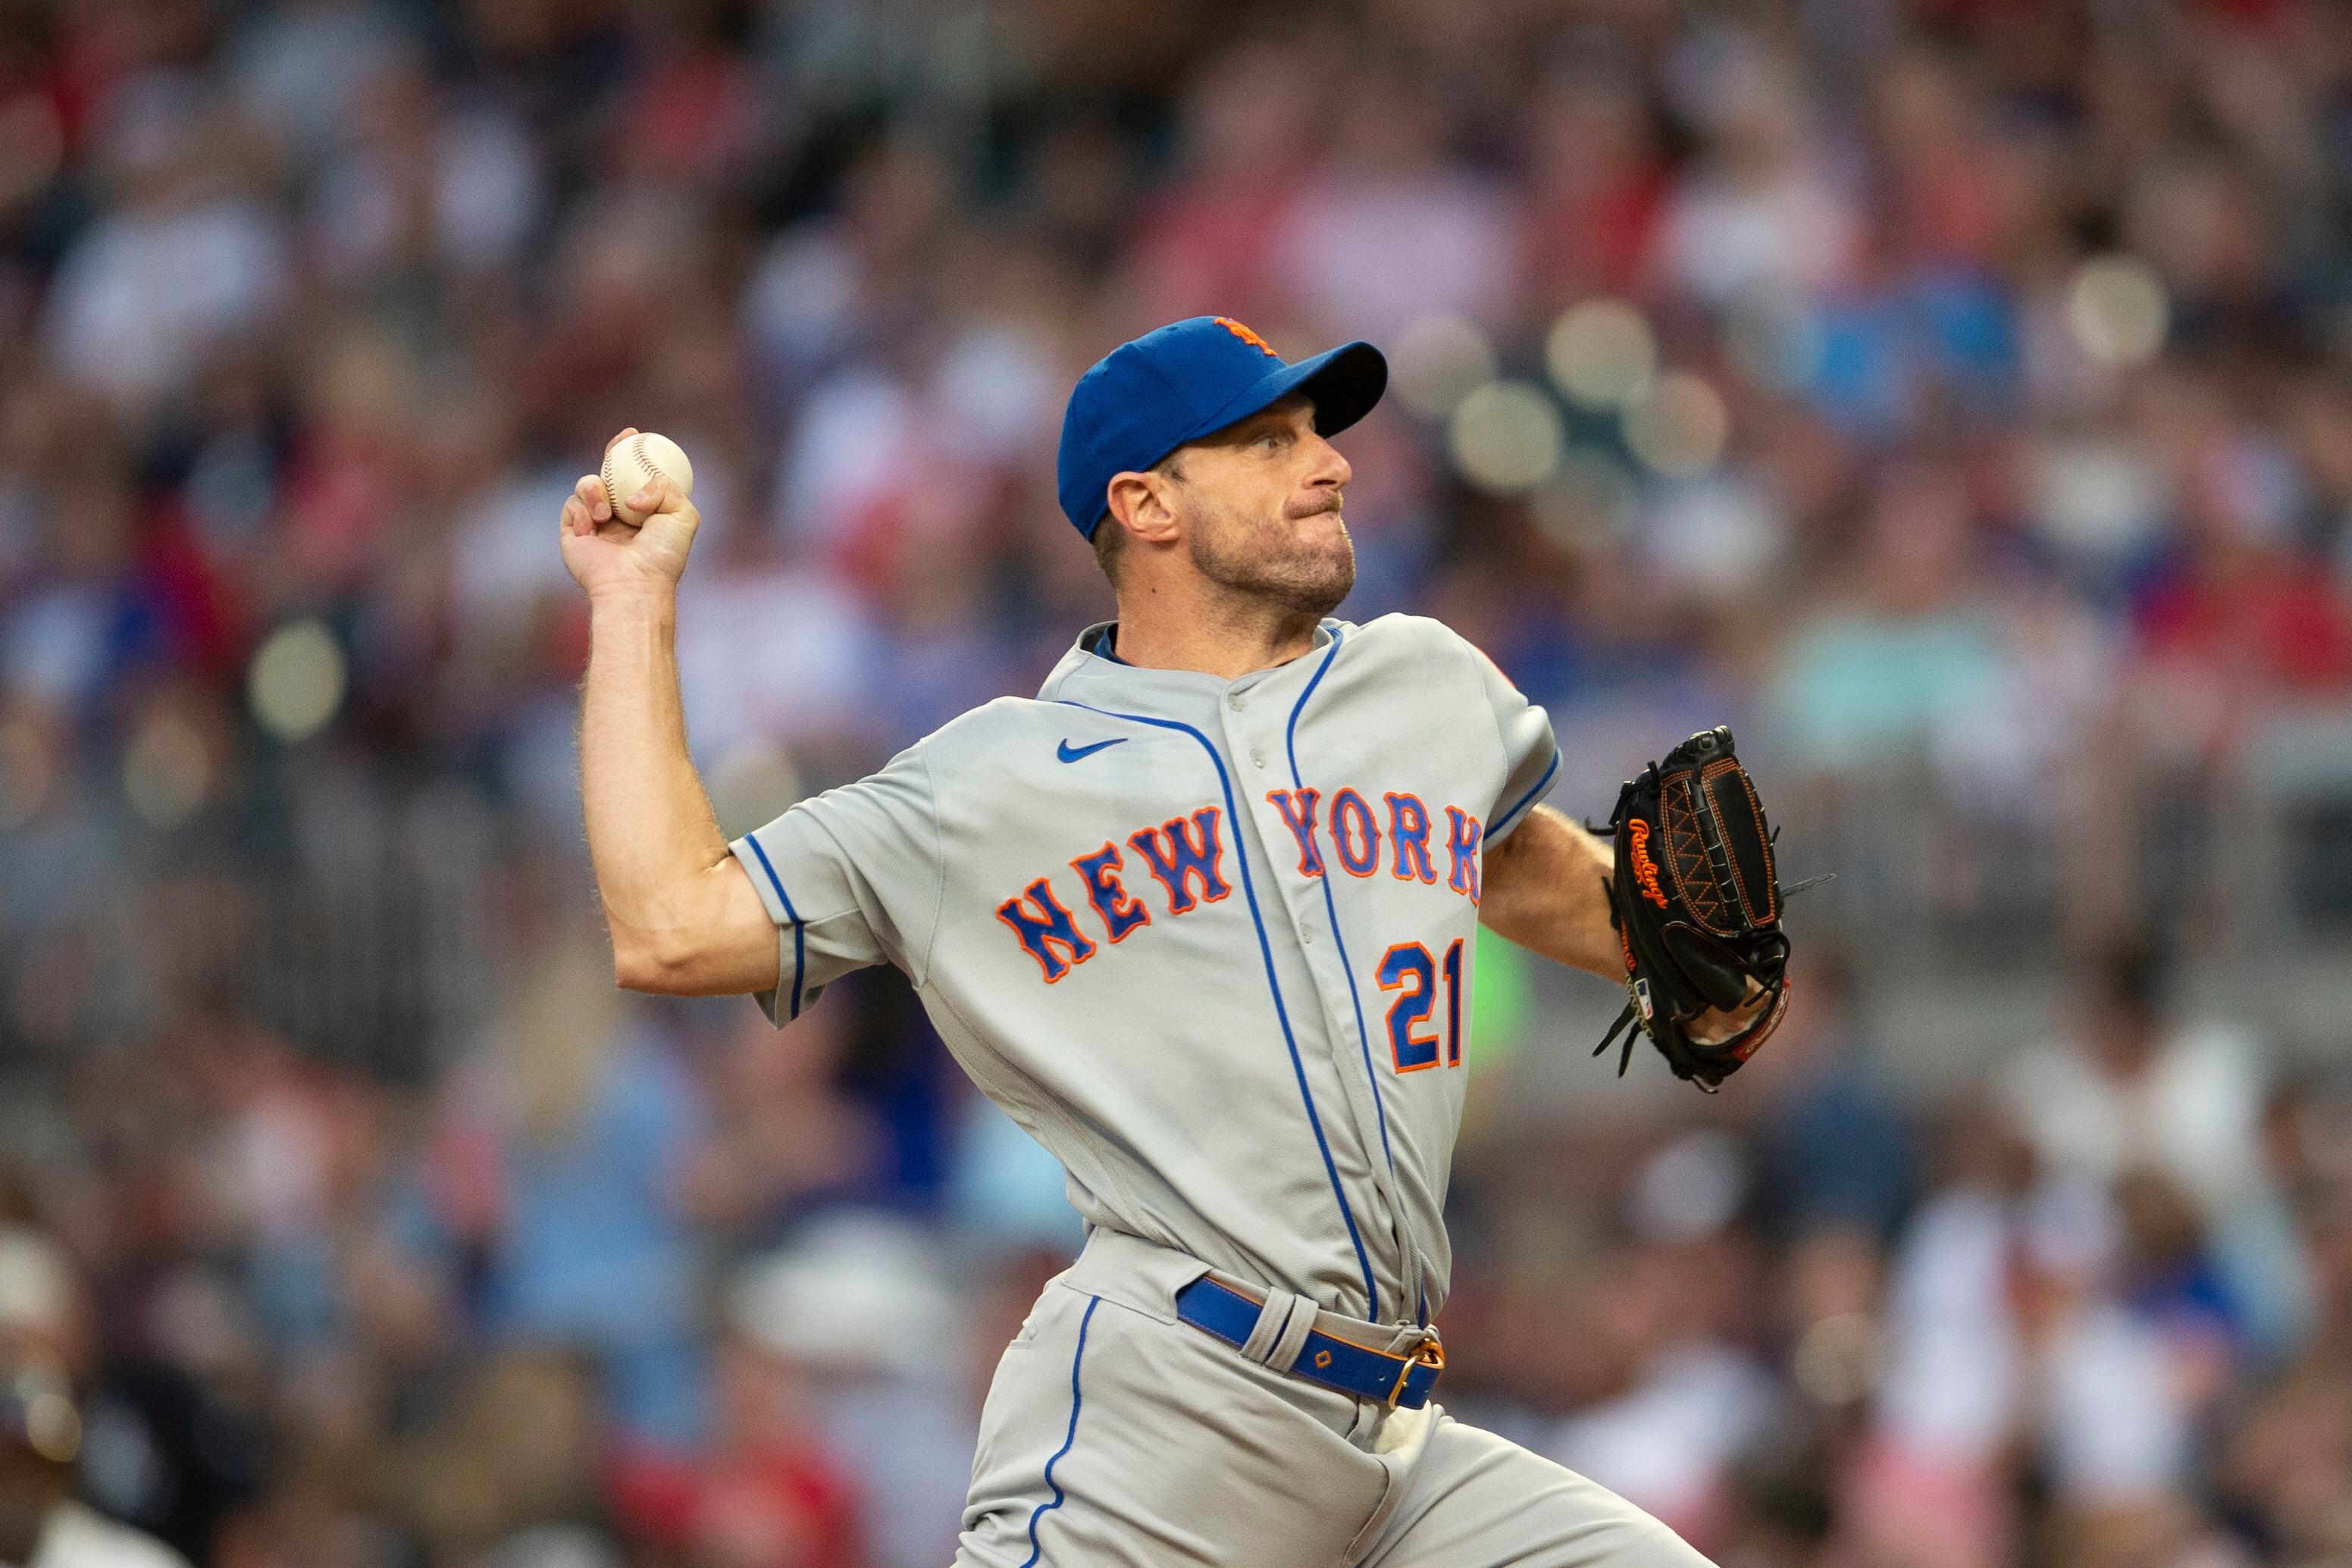 DeGrom injury news hangs over Mets 6-2 loss to Reds